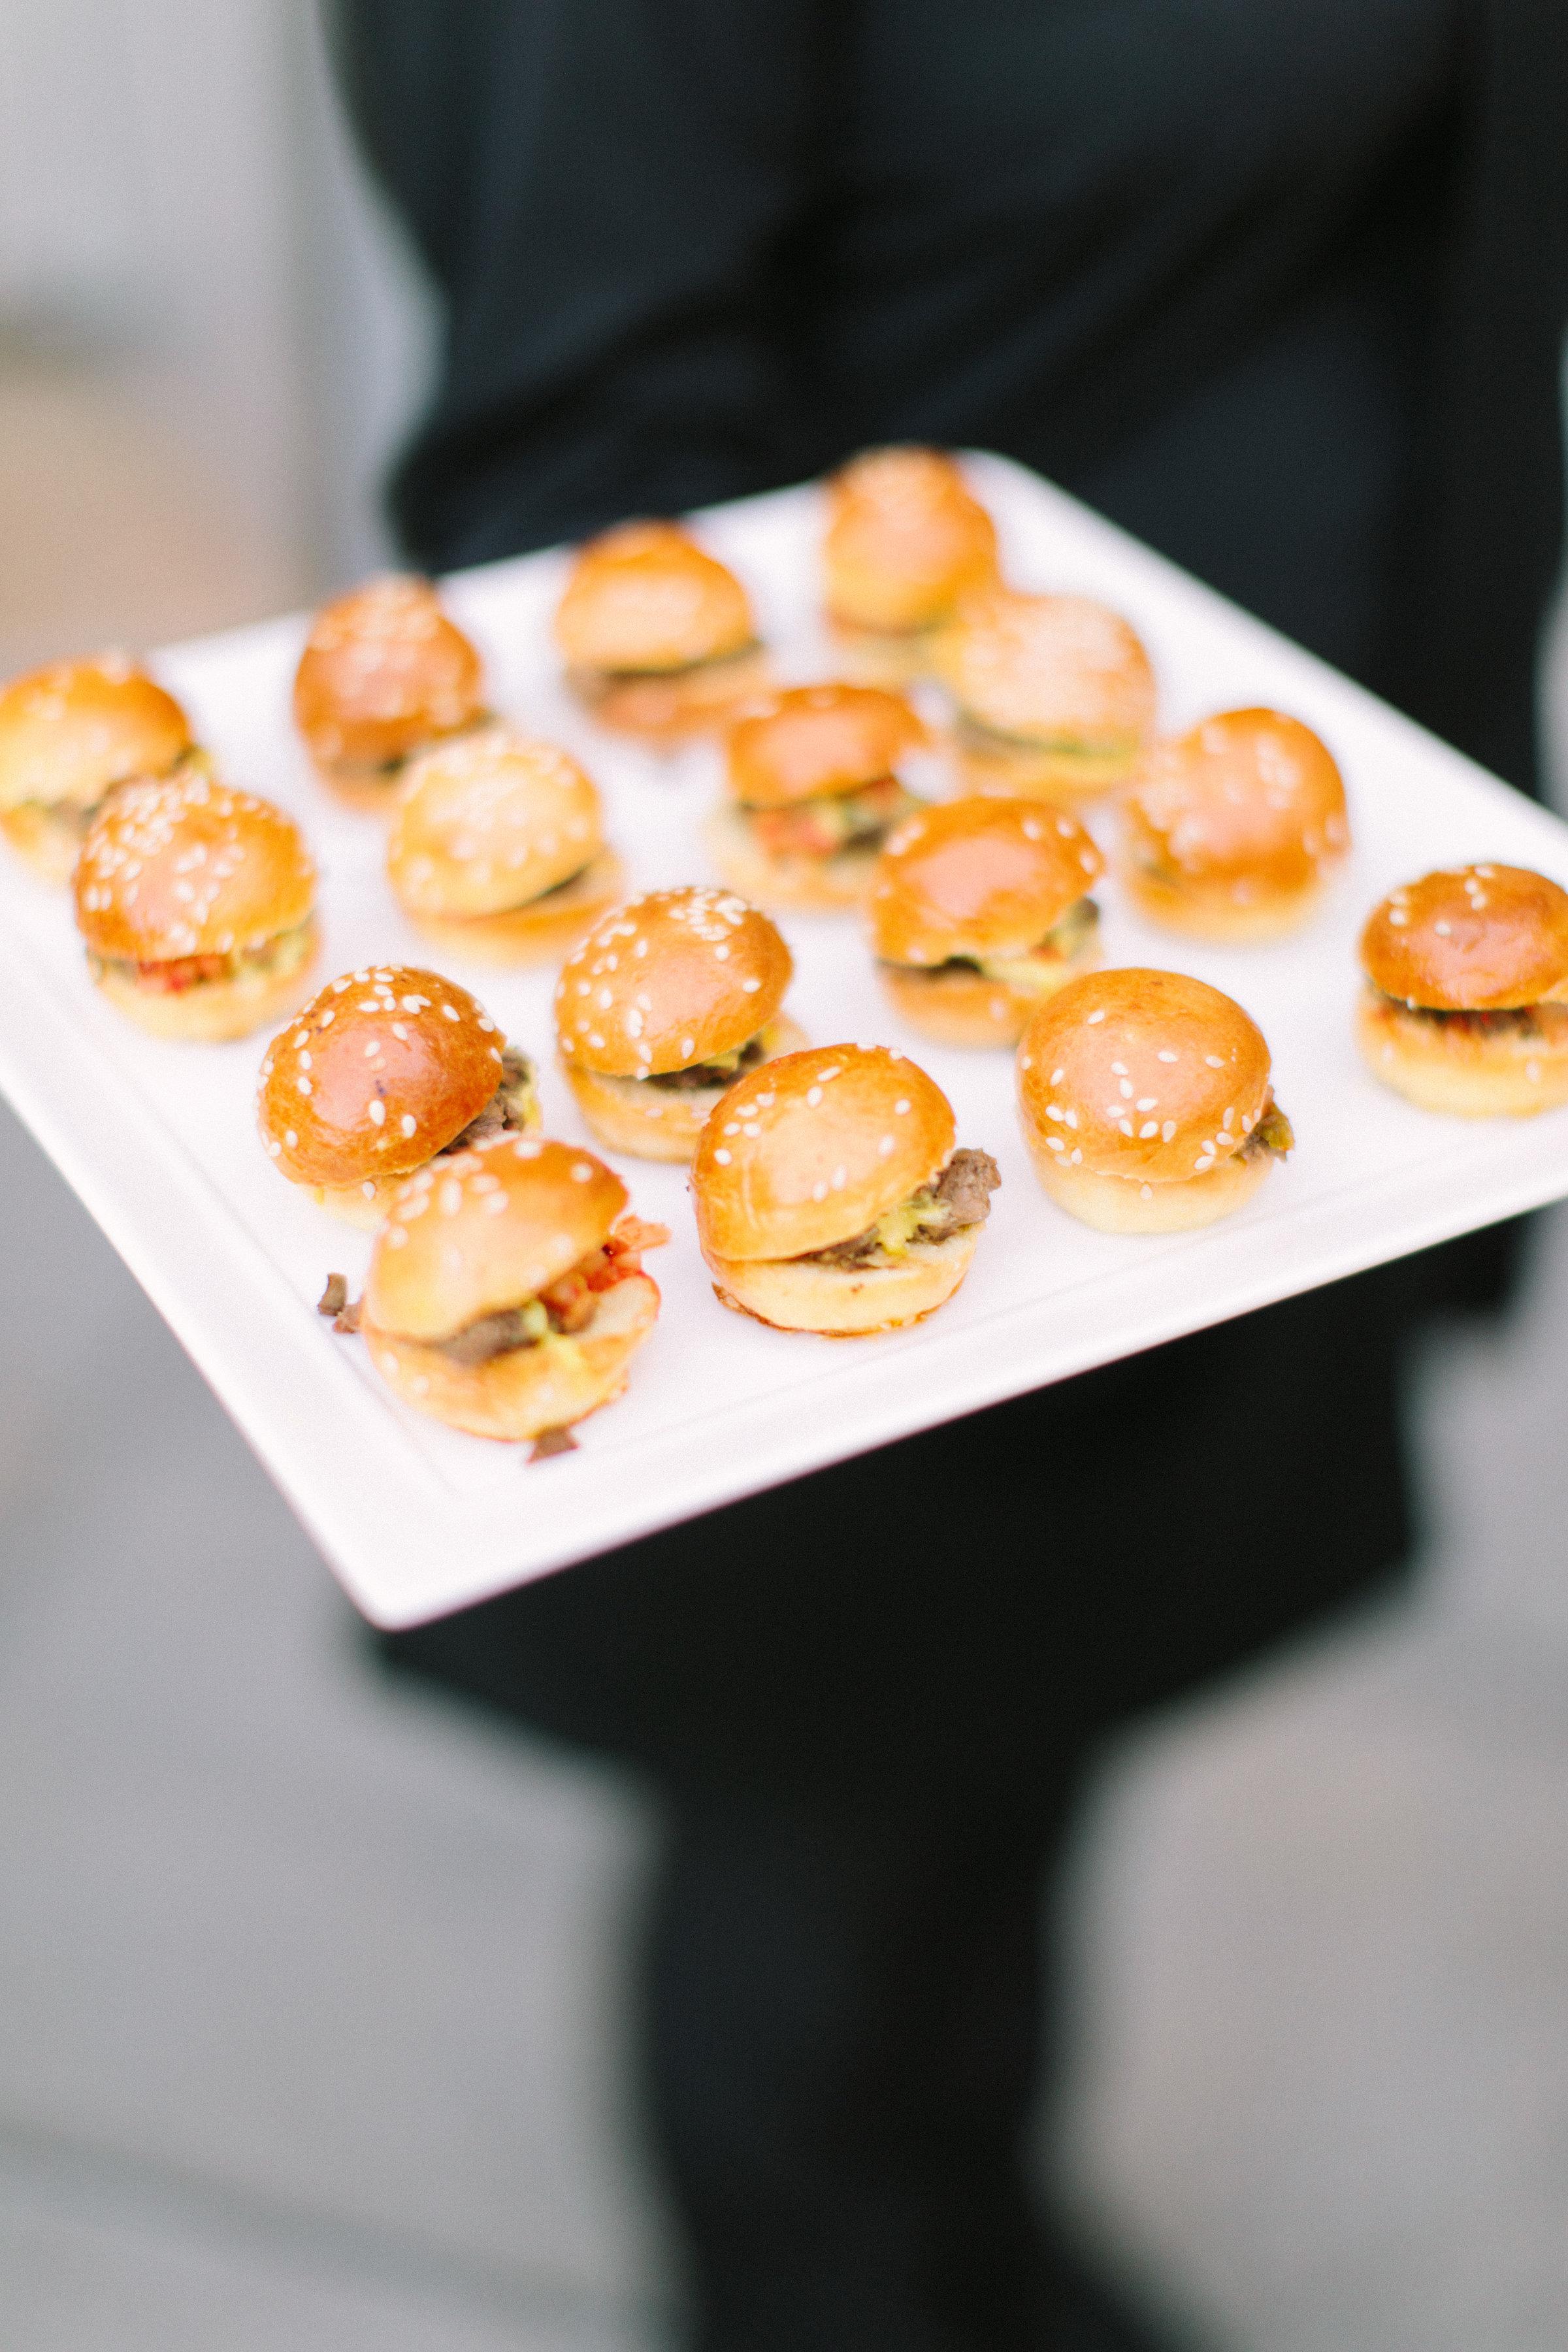 a server holds a plate of hor d'oeuvres in the form of small sandwiches on golden sesame buns